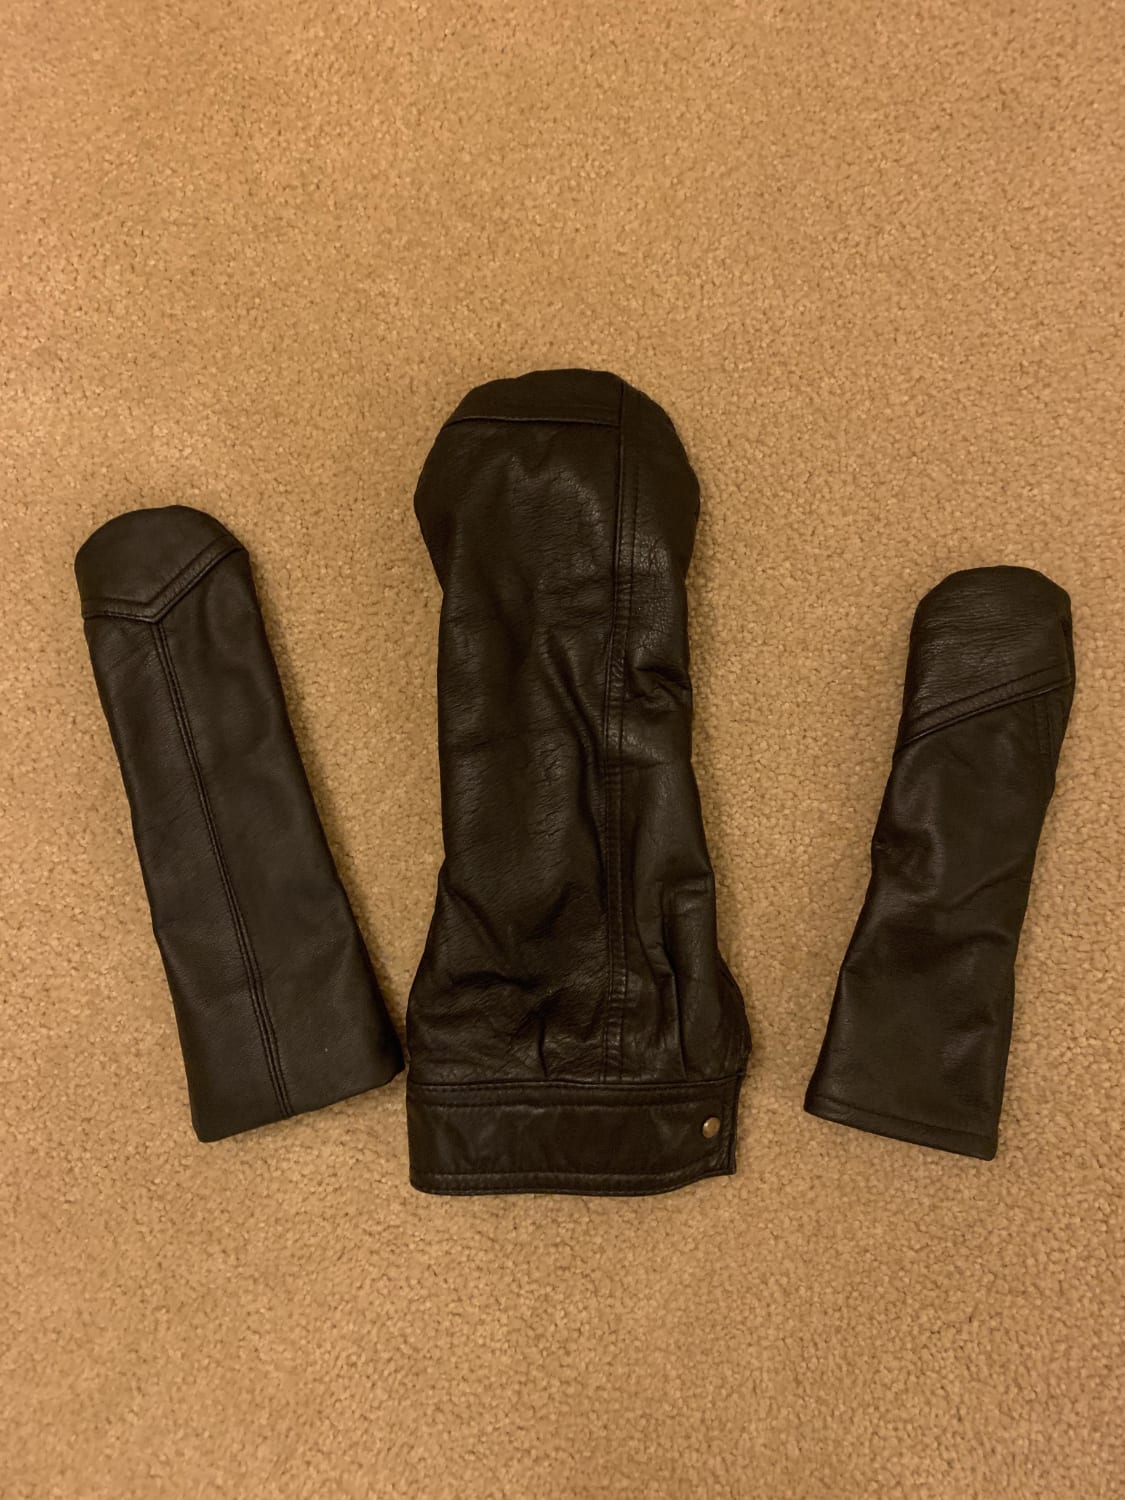 Before passing away a few months ago, my grandpa gave me a leather jacket. I never would wear it but kept it for a memoir. This Christmas, my mom surprised me by making head covers out of his leather jacket. His memory and love for the outdoors will live on! Hope you all love it as much as I do!!